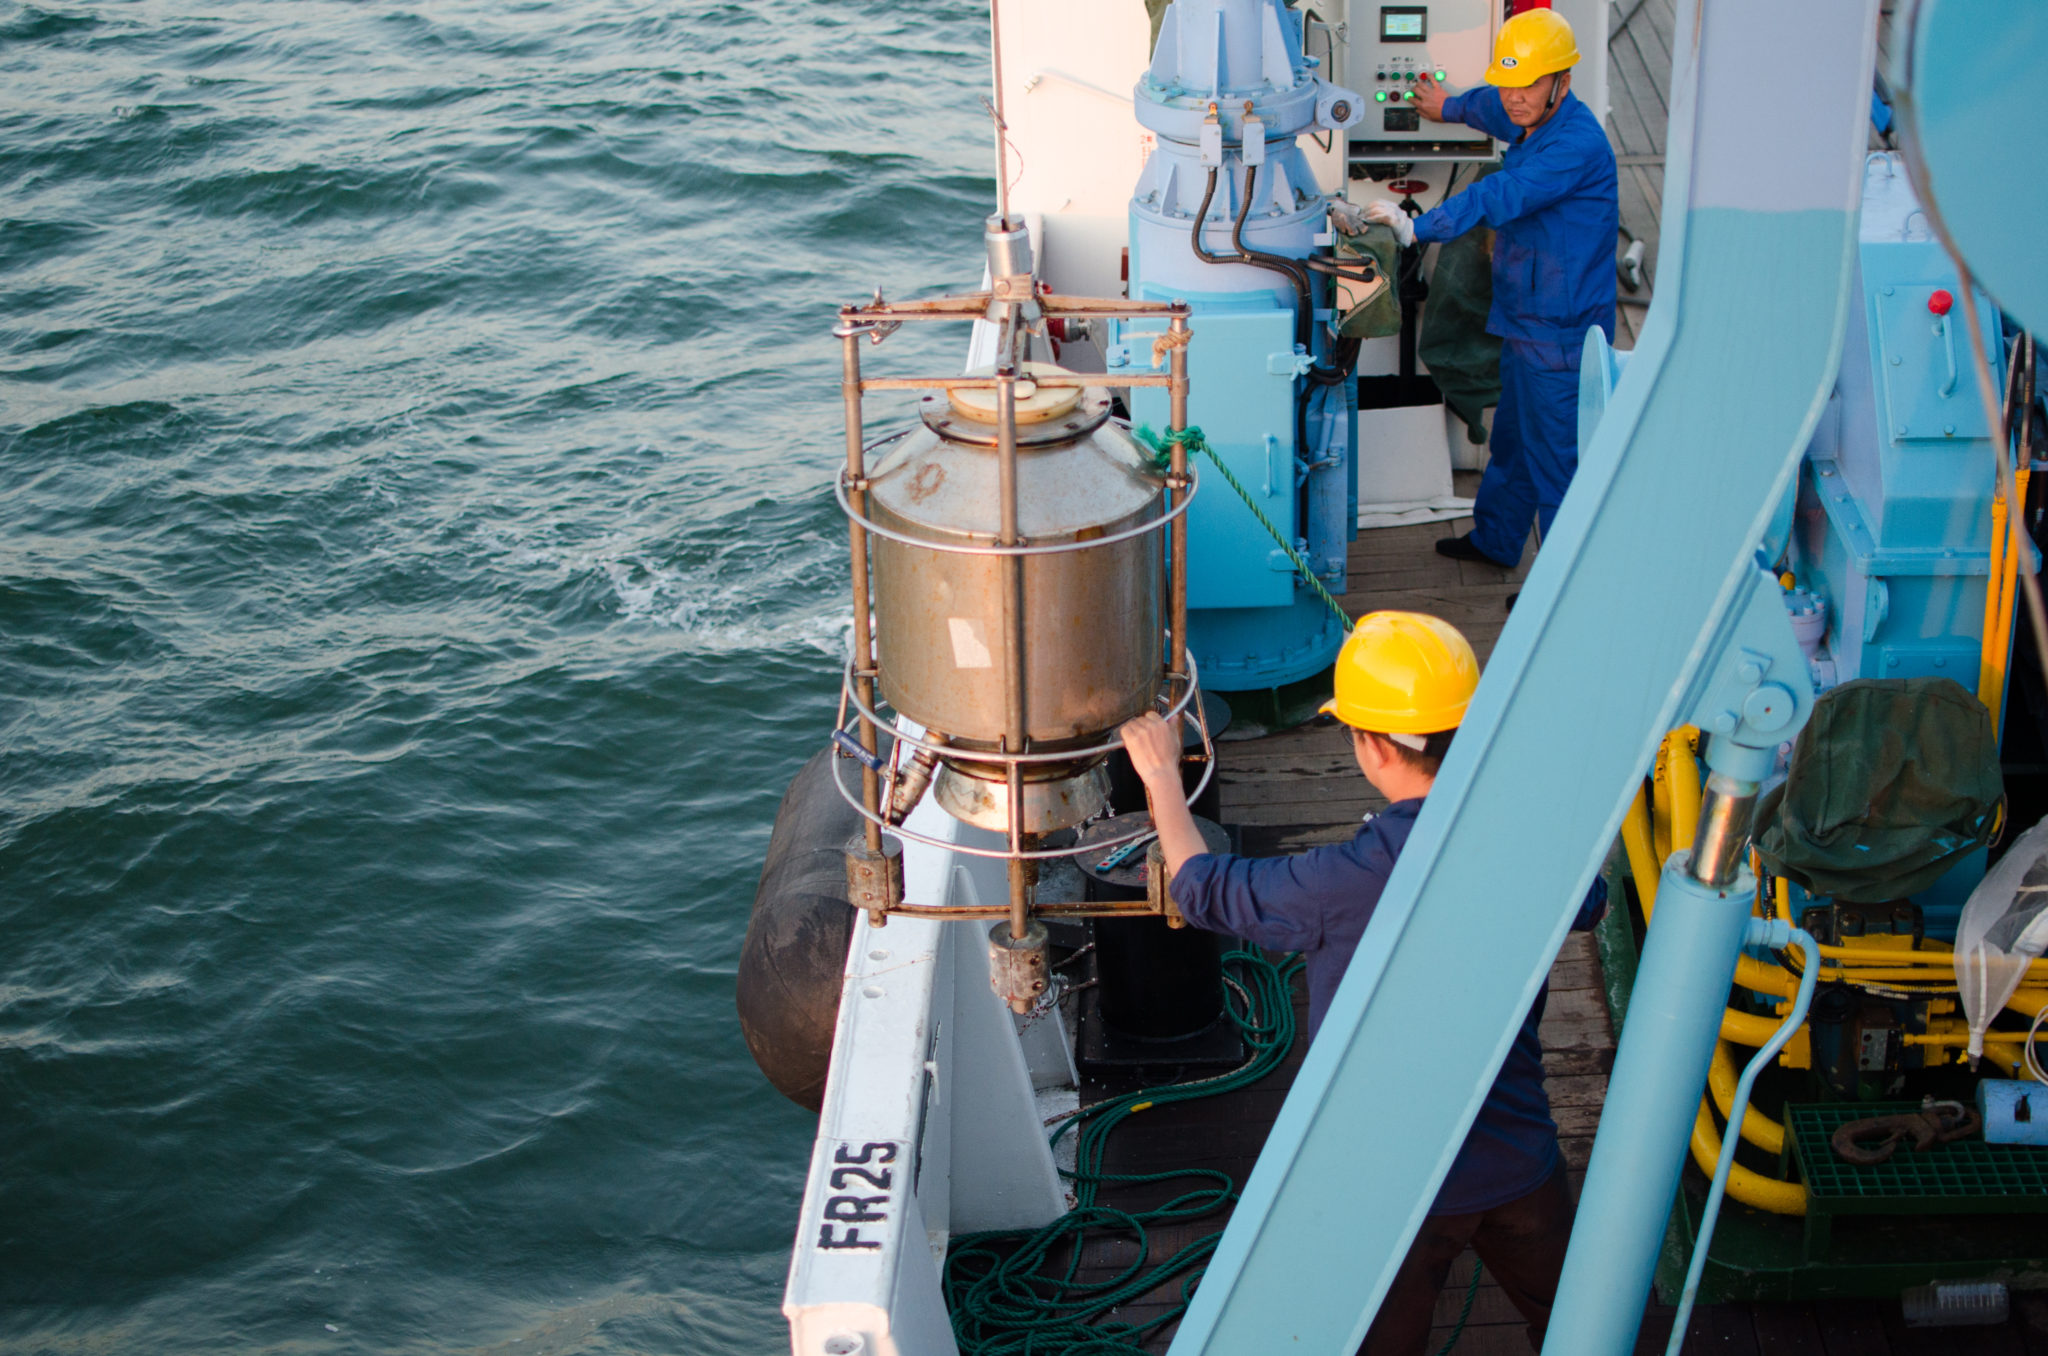 The researchers use a large volume water sampler to collect samples of marine microplastics in the waters off the Changjiang estuary (Image: Li Daoji)